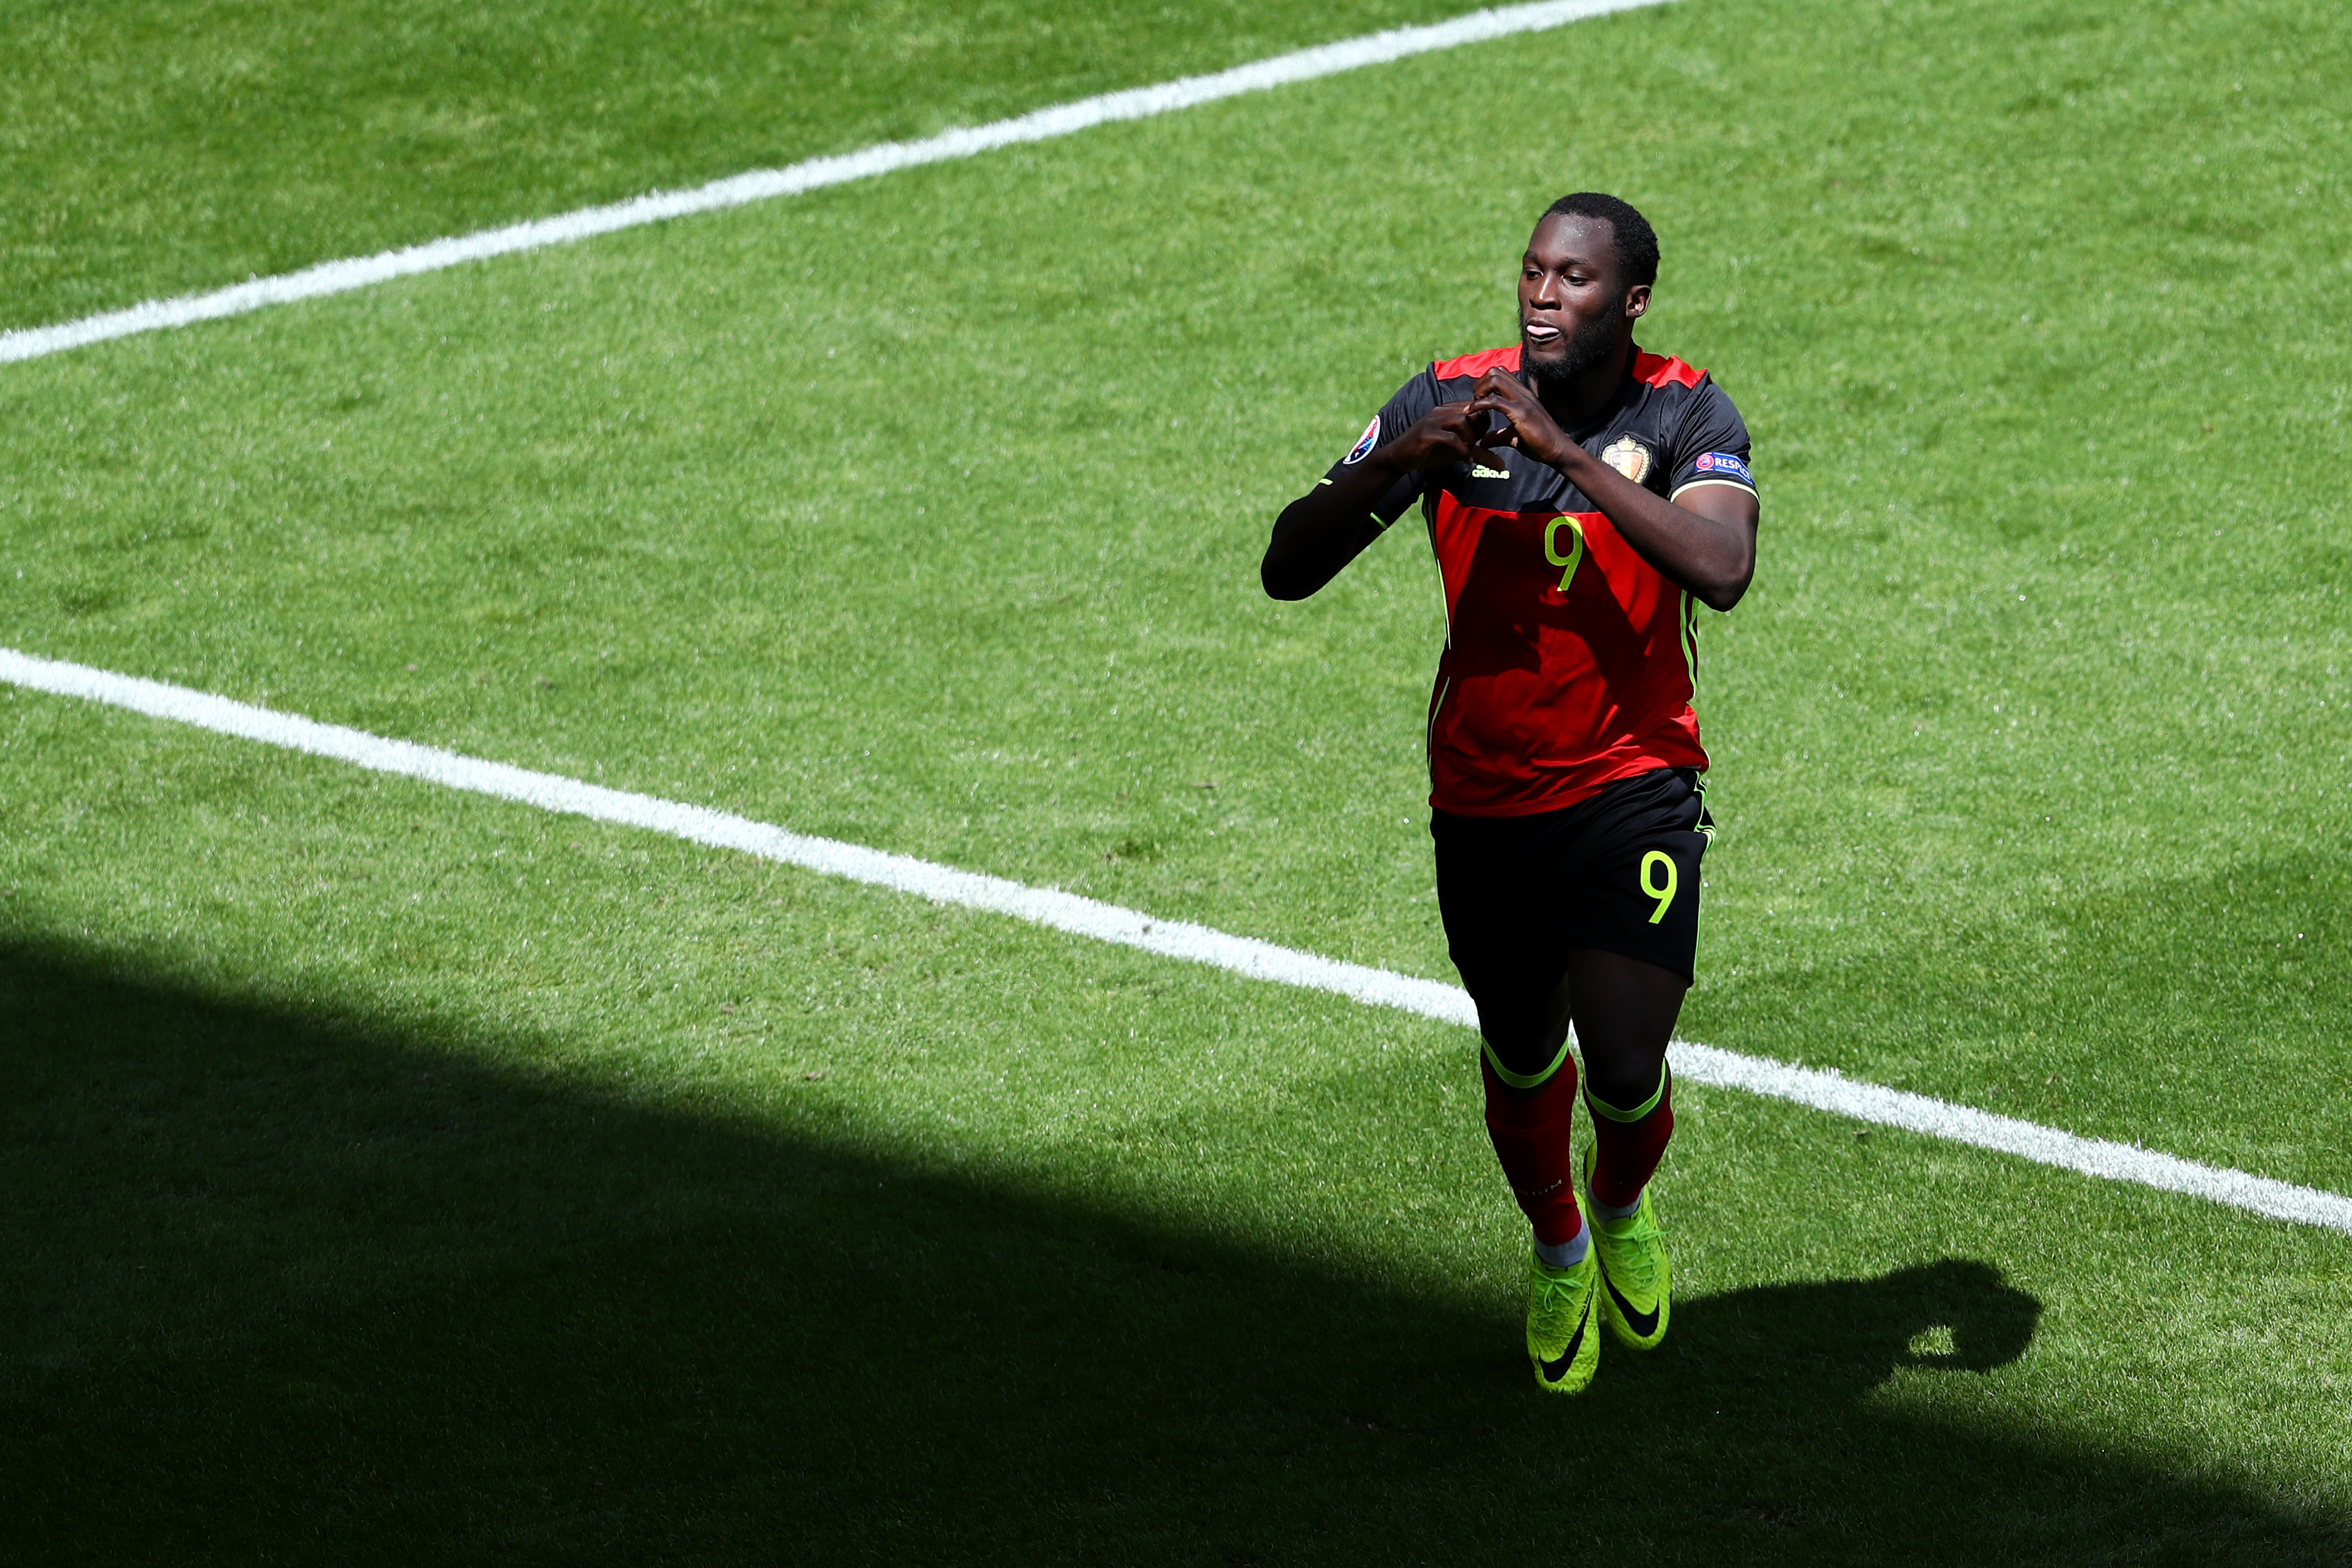 BORDEAUX, FRANCE - JUNE 18:  Romelu Lukaku of Belgium celebrates scoring his team's first goal  during the UEFA EURO 2016 Group E match between Belgium and Republic of Ireland at Stade Matmut Atlantique on June 18, 2016 in Bordeaux, France.  (Photo by Dean Mouhtaropoulos/Getty Images)